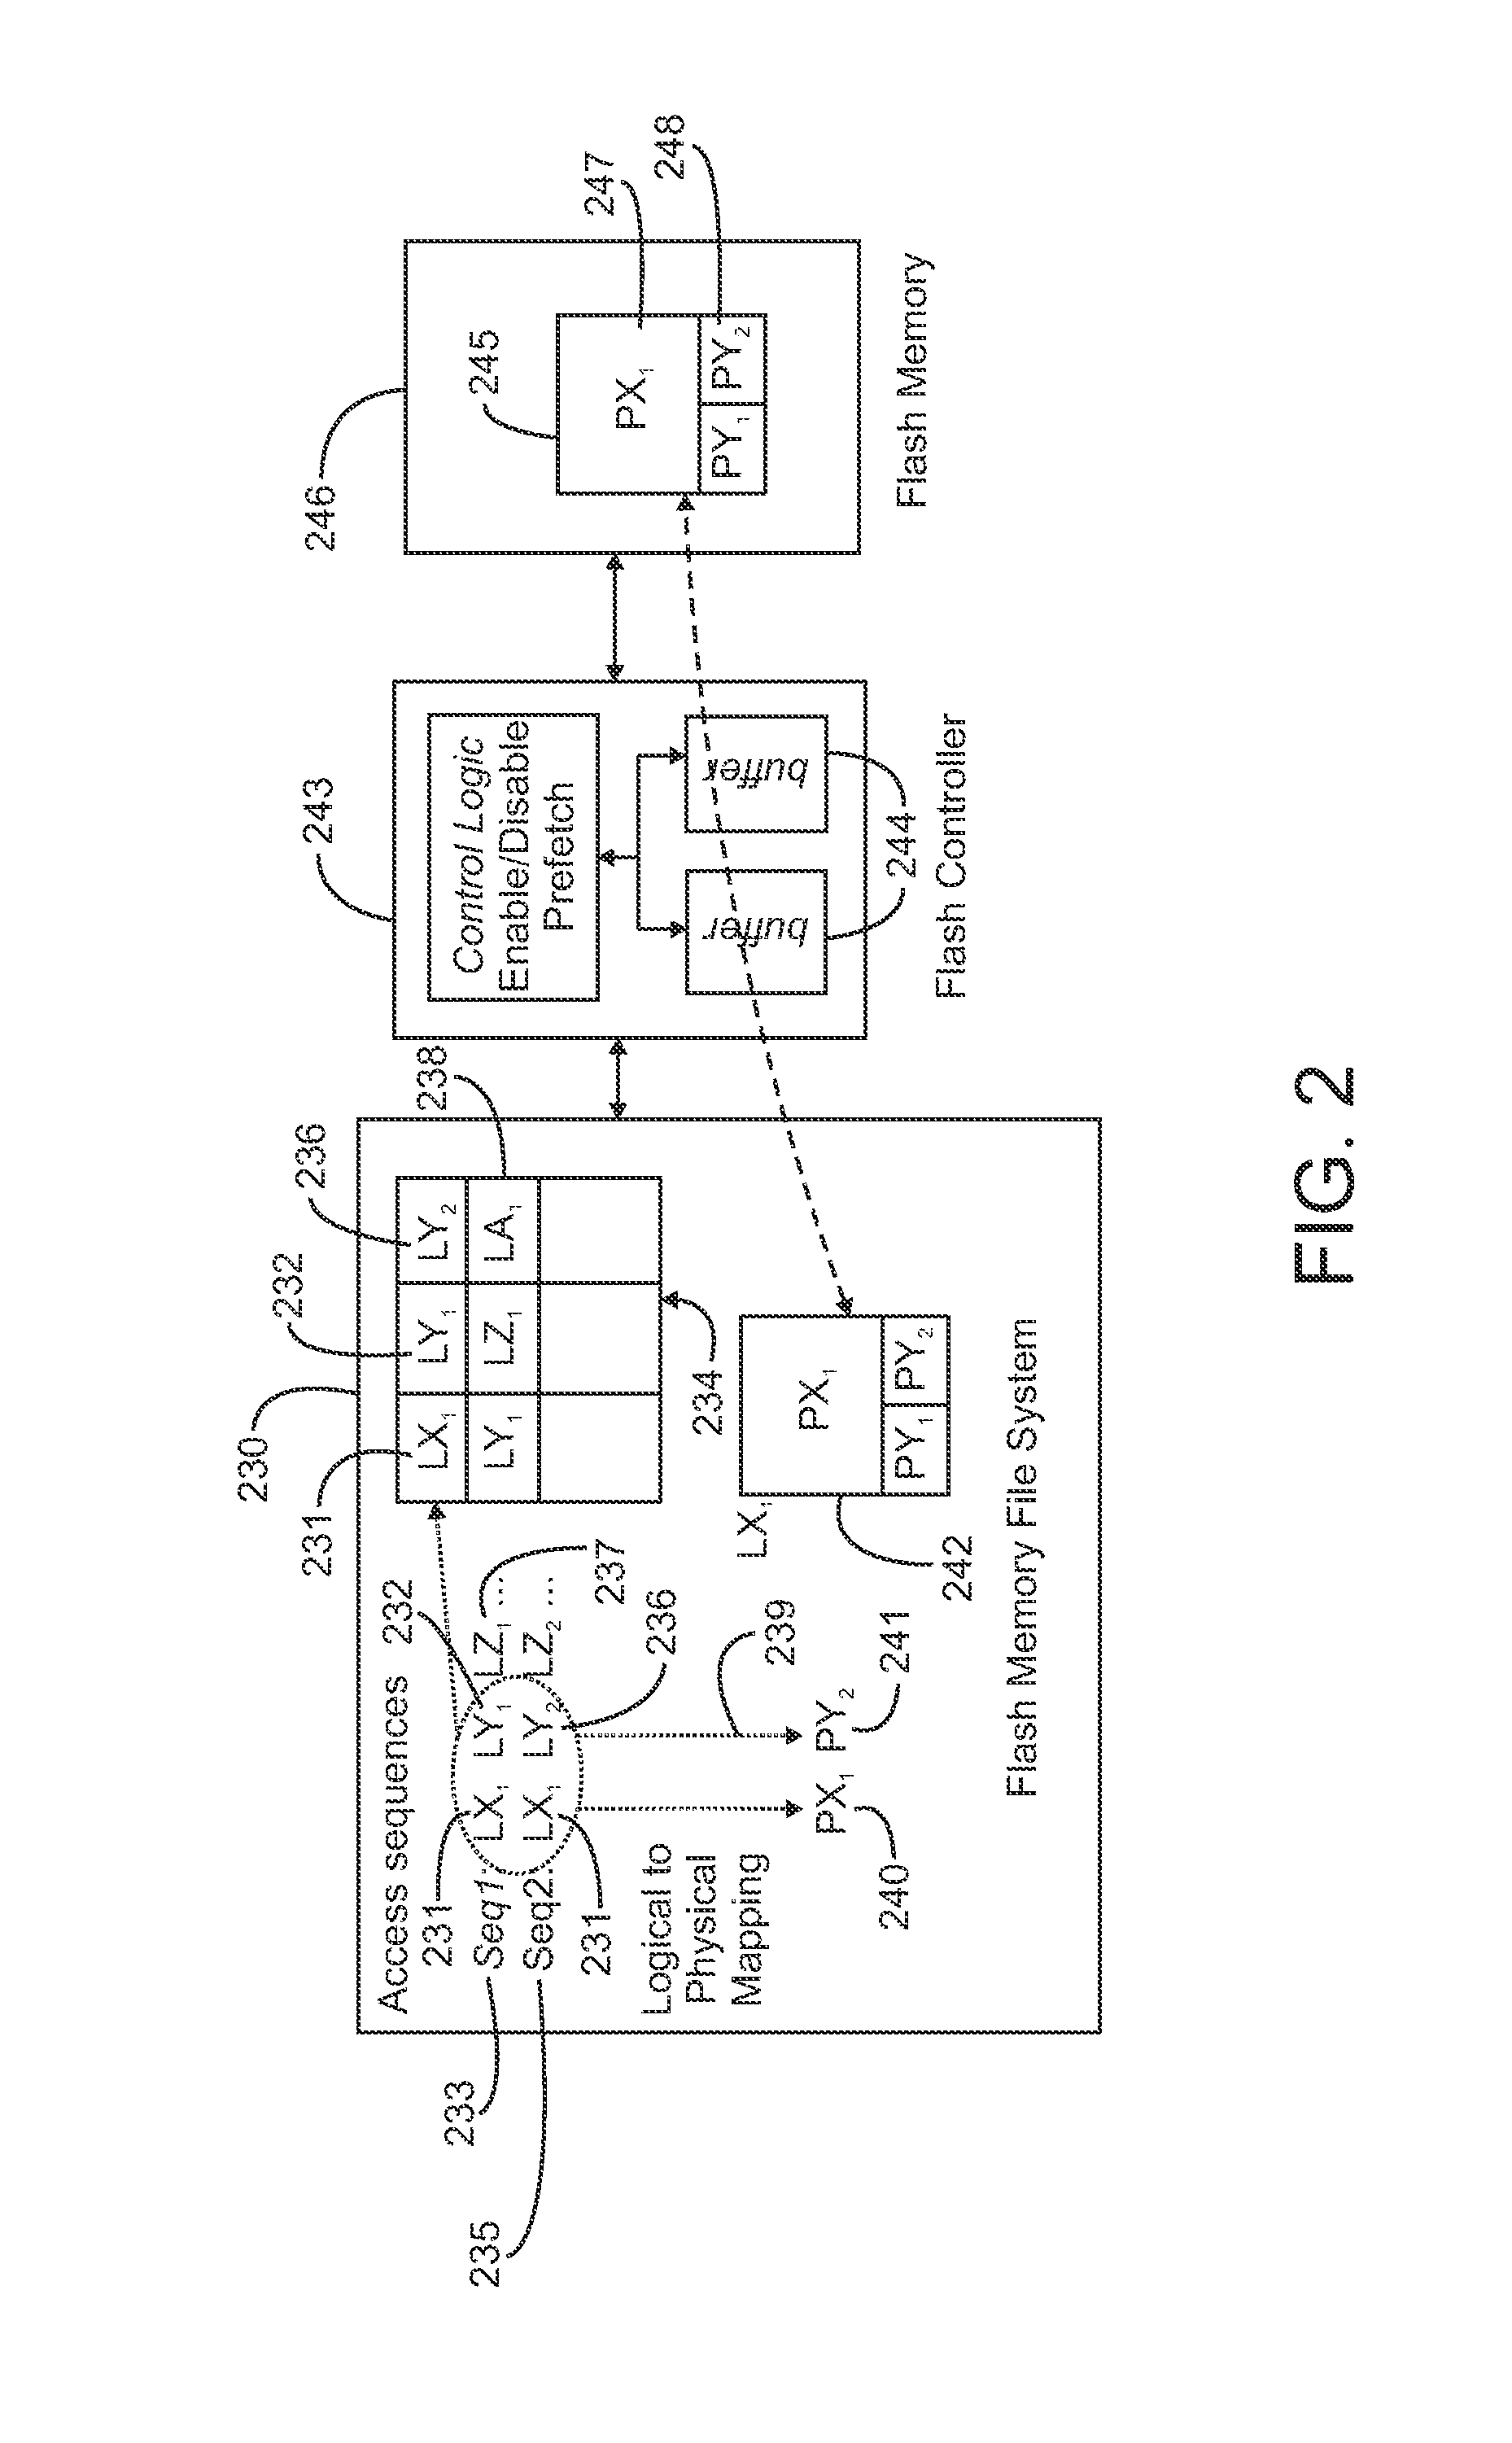 Storing multi-stream non-linear access patterns in a flash based file-system